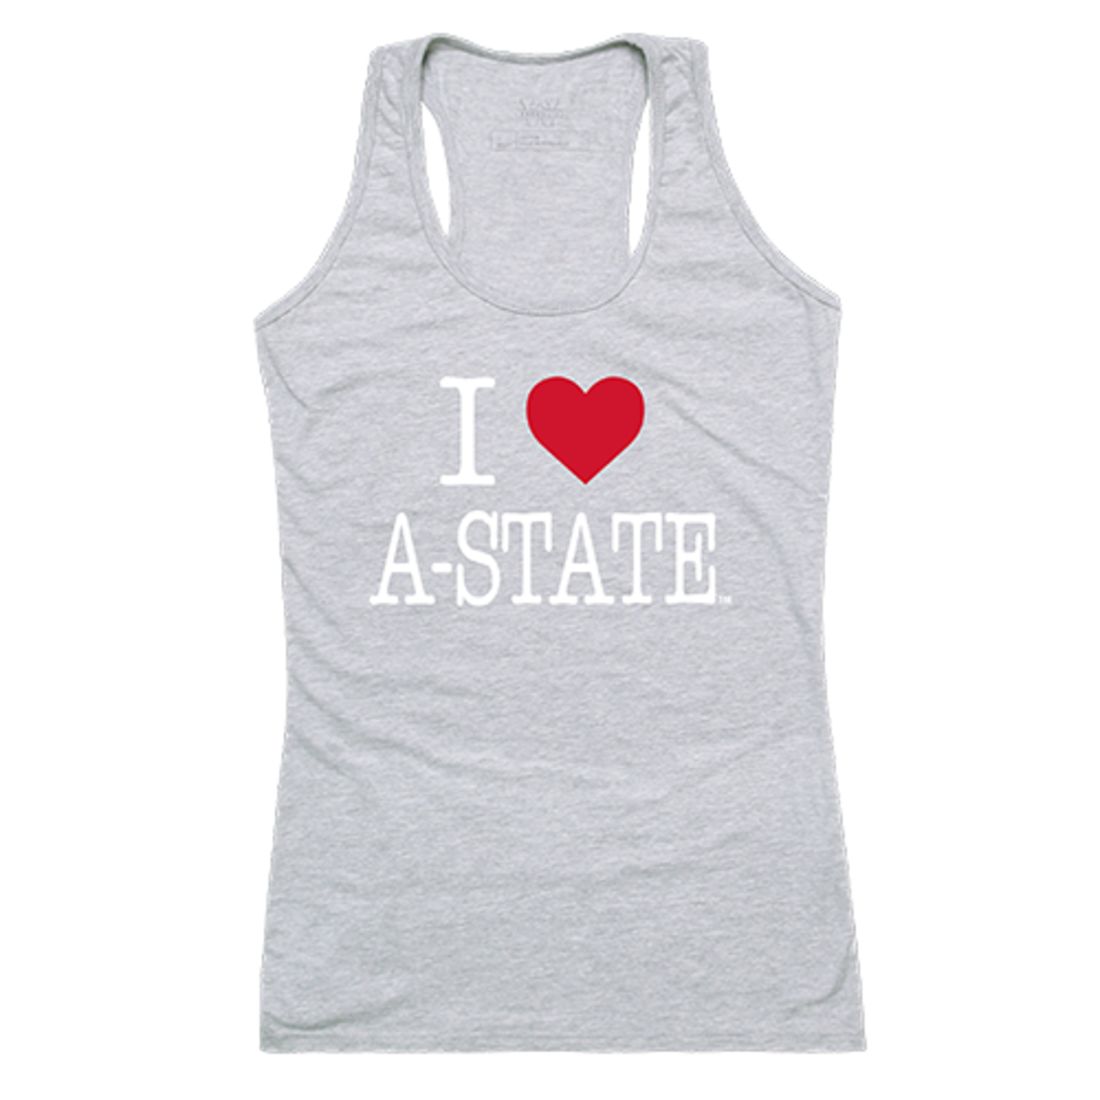 Arkansas A-State University Red Wolves Womens Love Tank Top Tee T-Shirt Heather Grey-Campus-Wardrobe